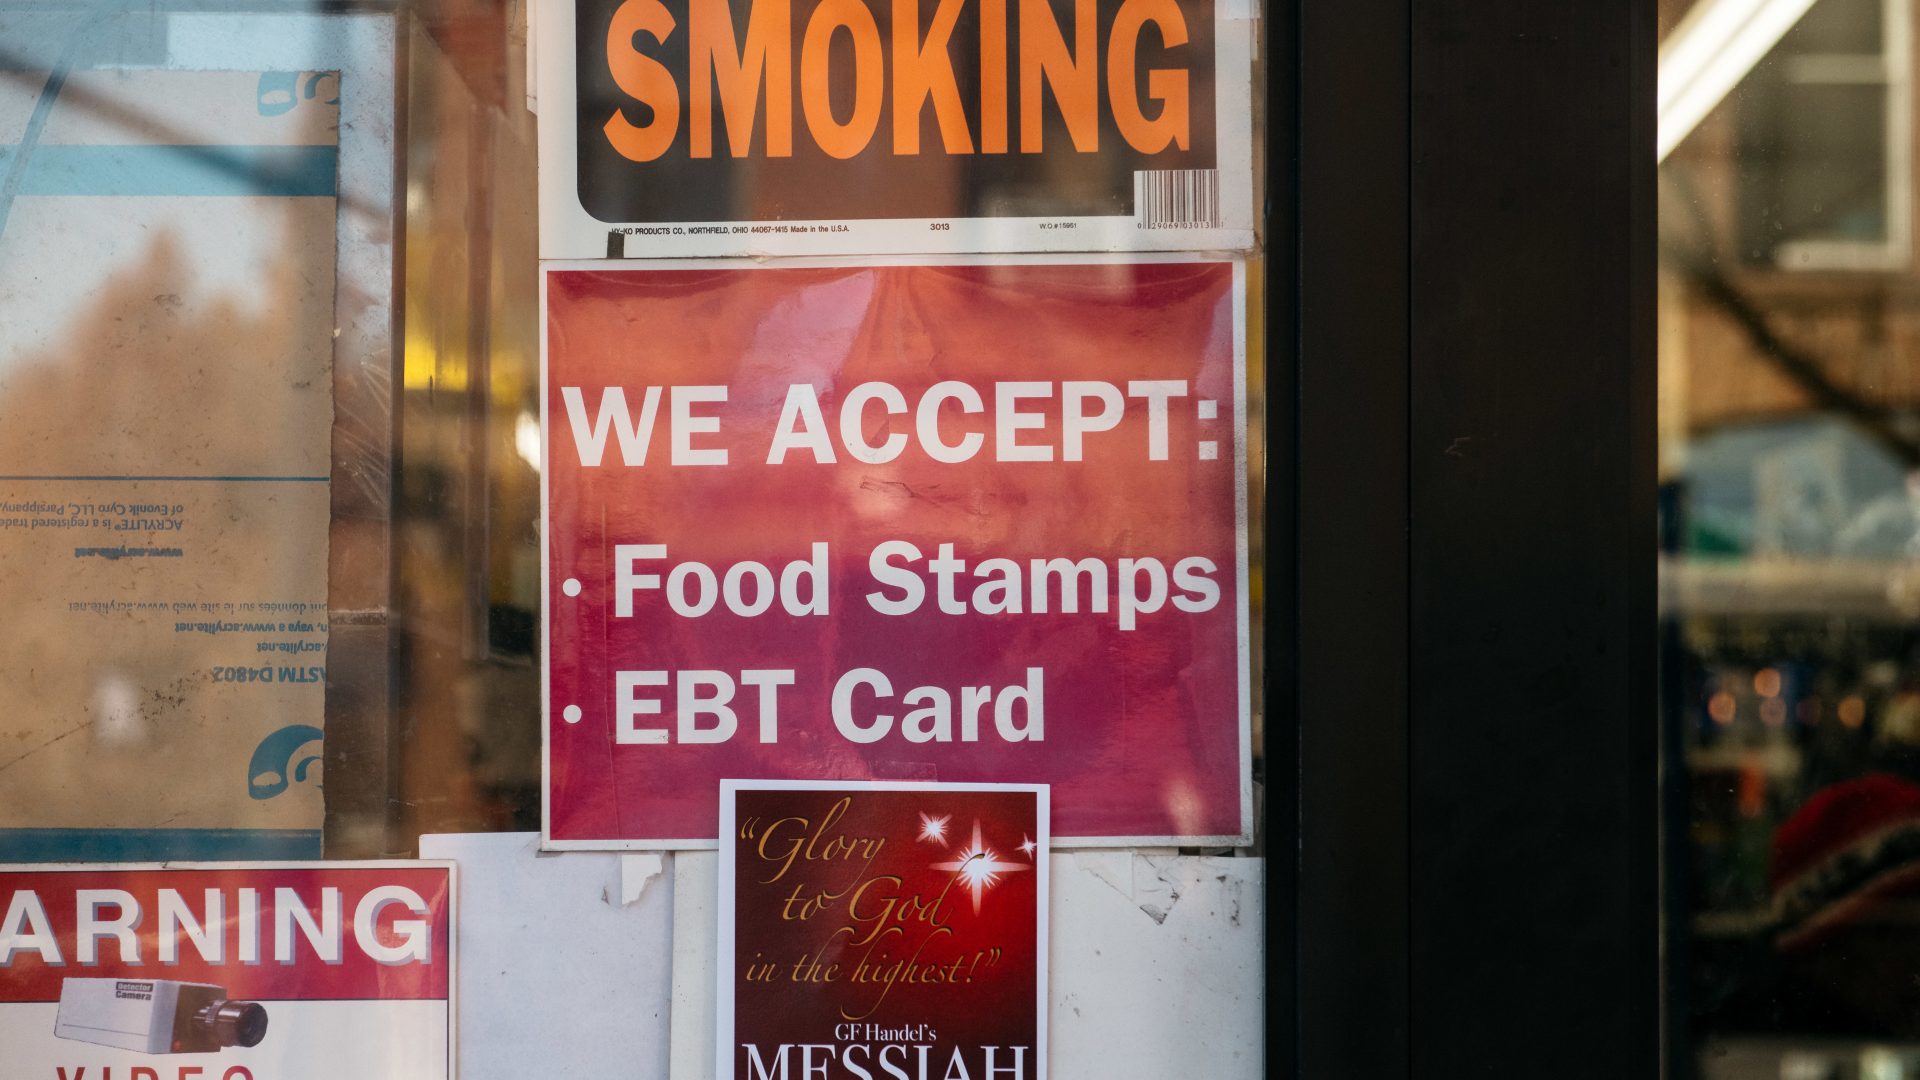 A judge has tossed out a U.S. Department of Agriculture rule that would have limited food stamps, noting that during the pandemic 